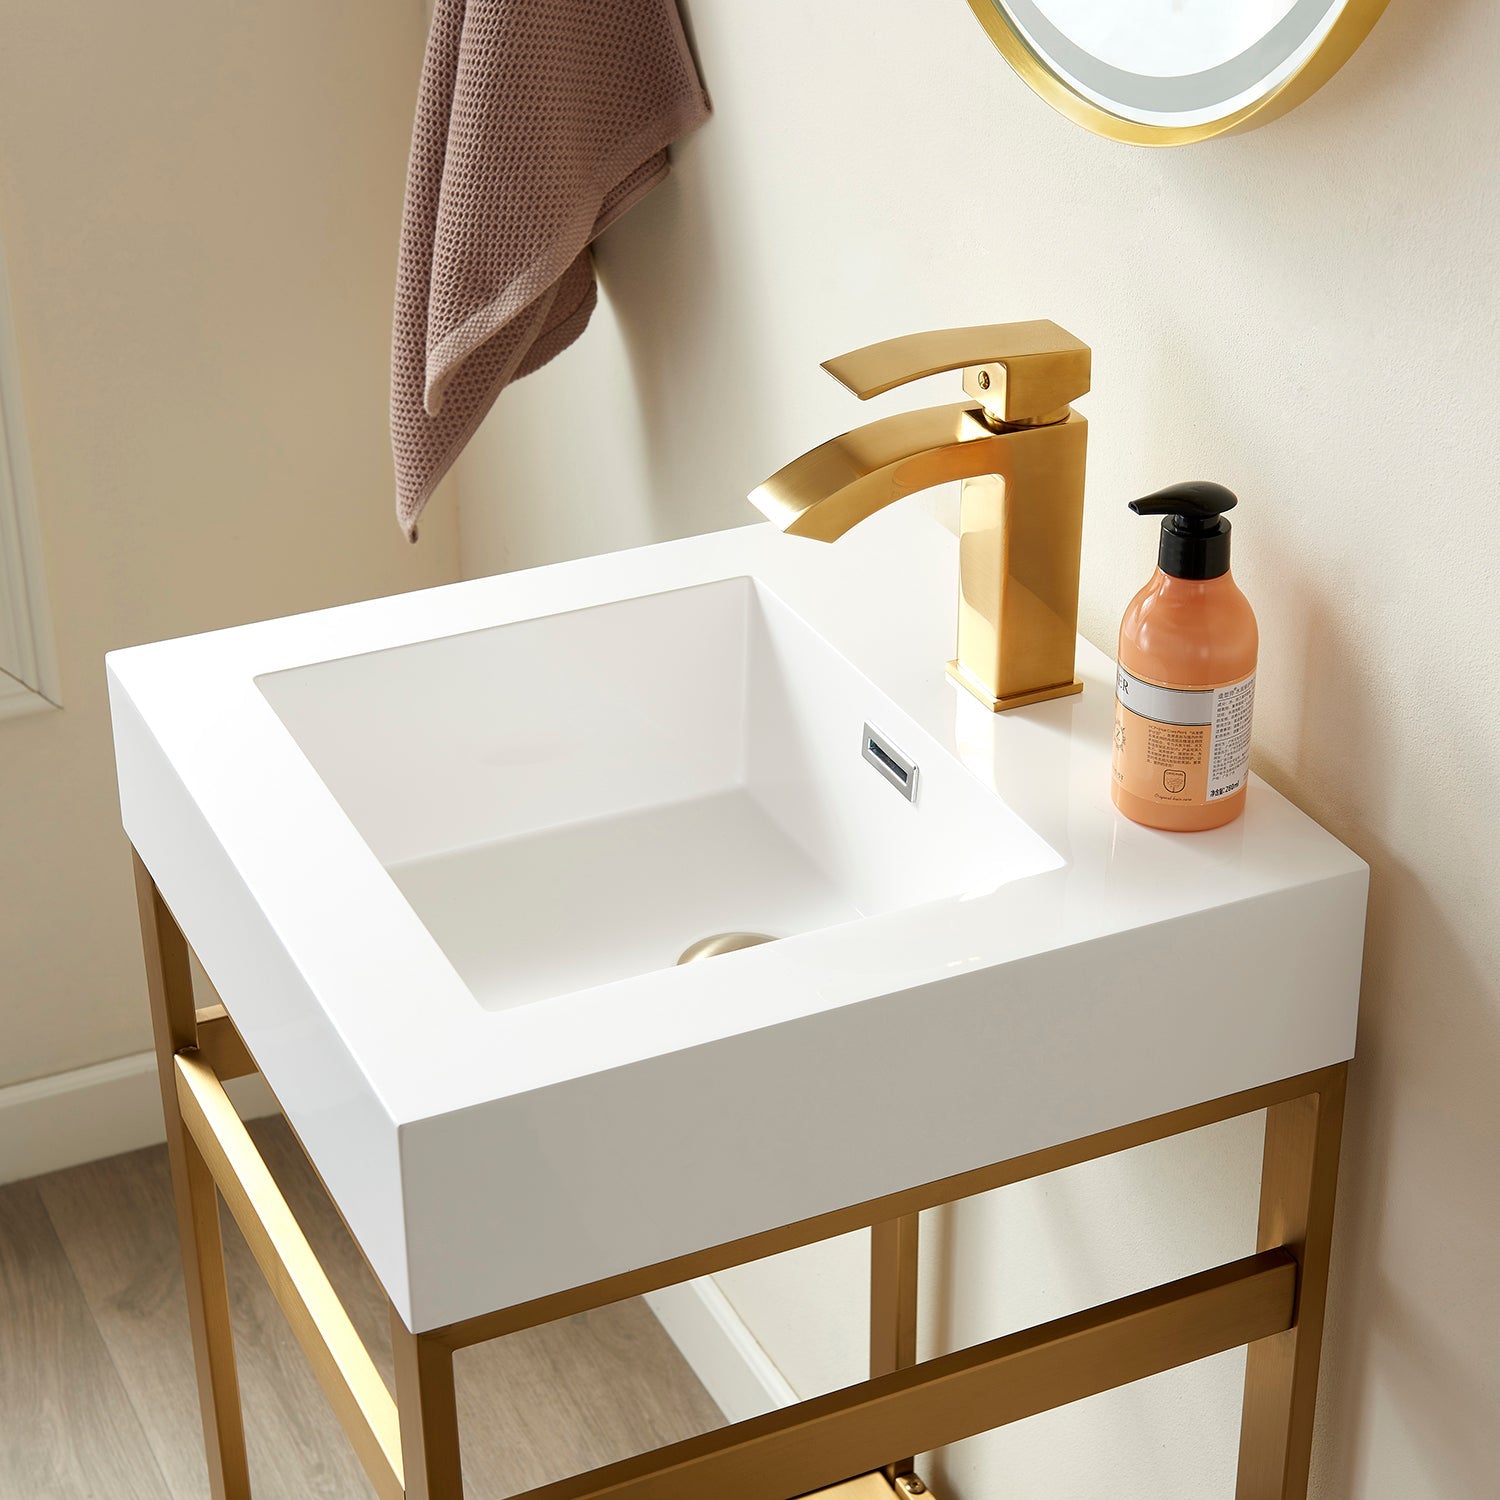 Vinnov Ablitas Single Sink Bathroom Vanity with Metal Support and White One-Piece Composite Stone Sink Top